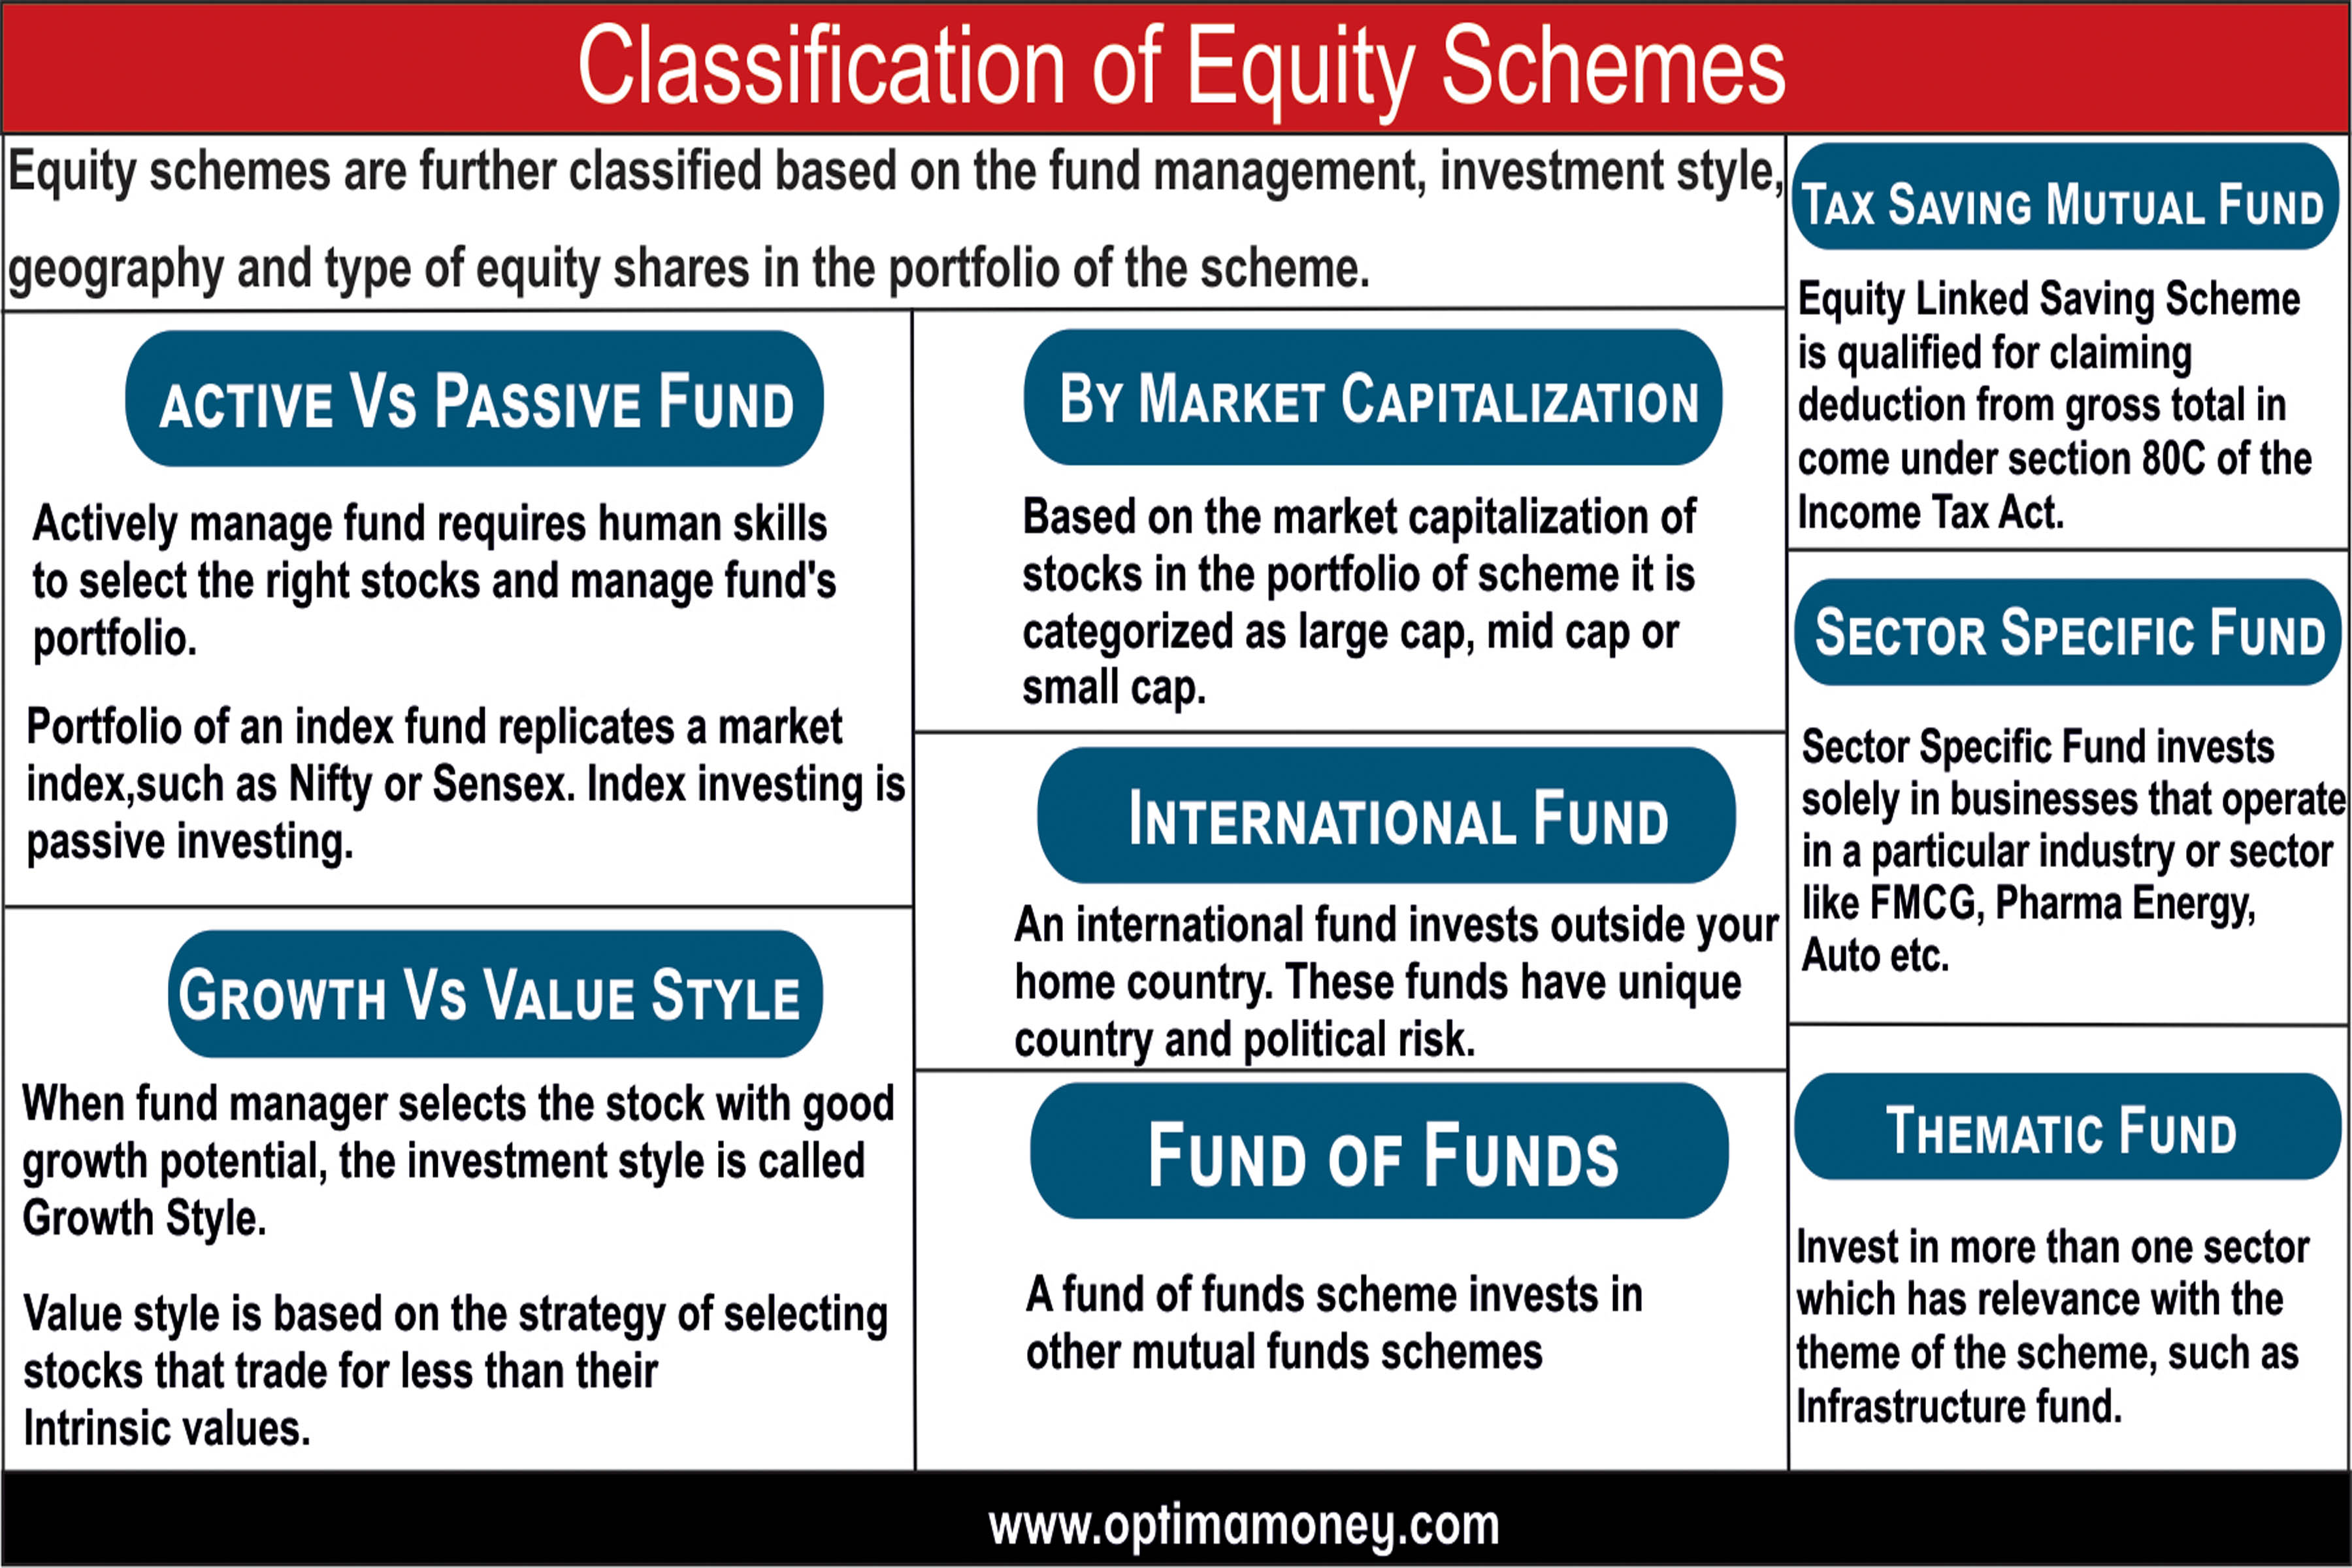 Types of Equity Schemes